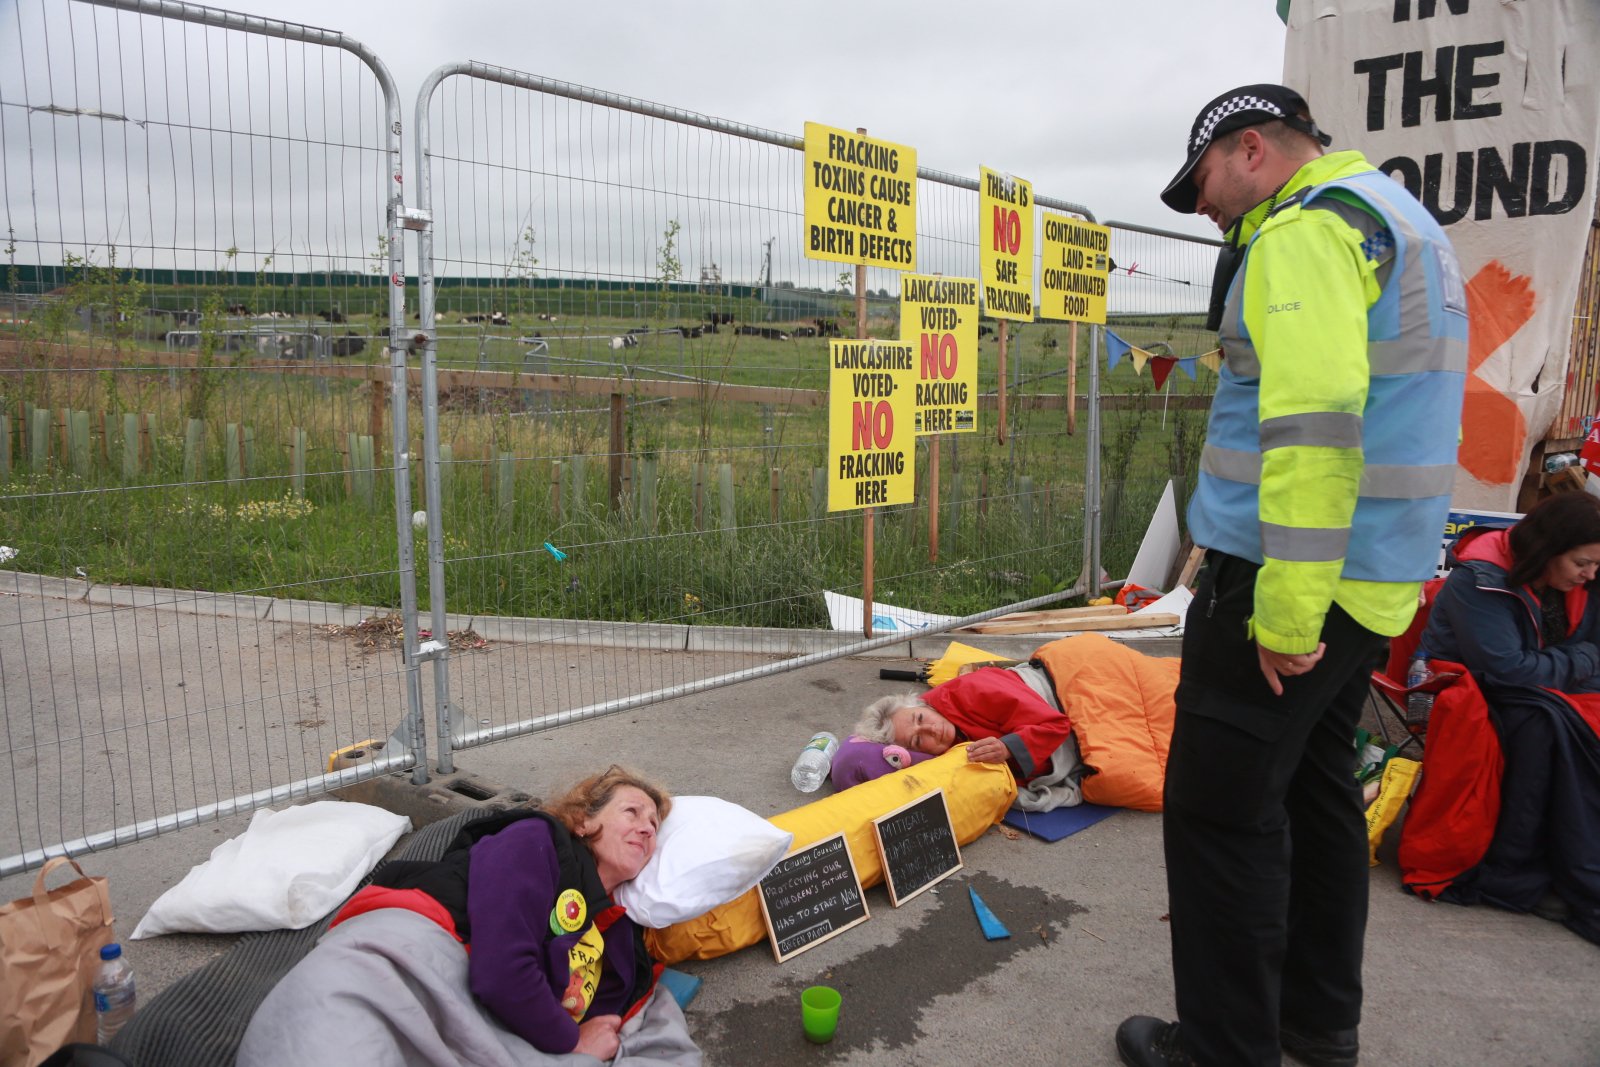 English local councillor Gina Dowding protests a fracking test drill site at Preston Road in Lancashire on July 3 2017